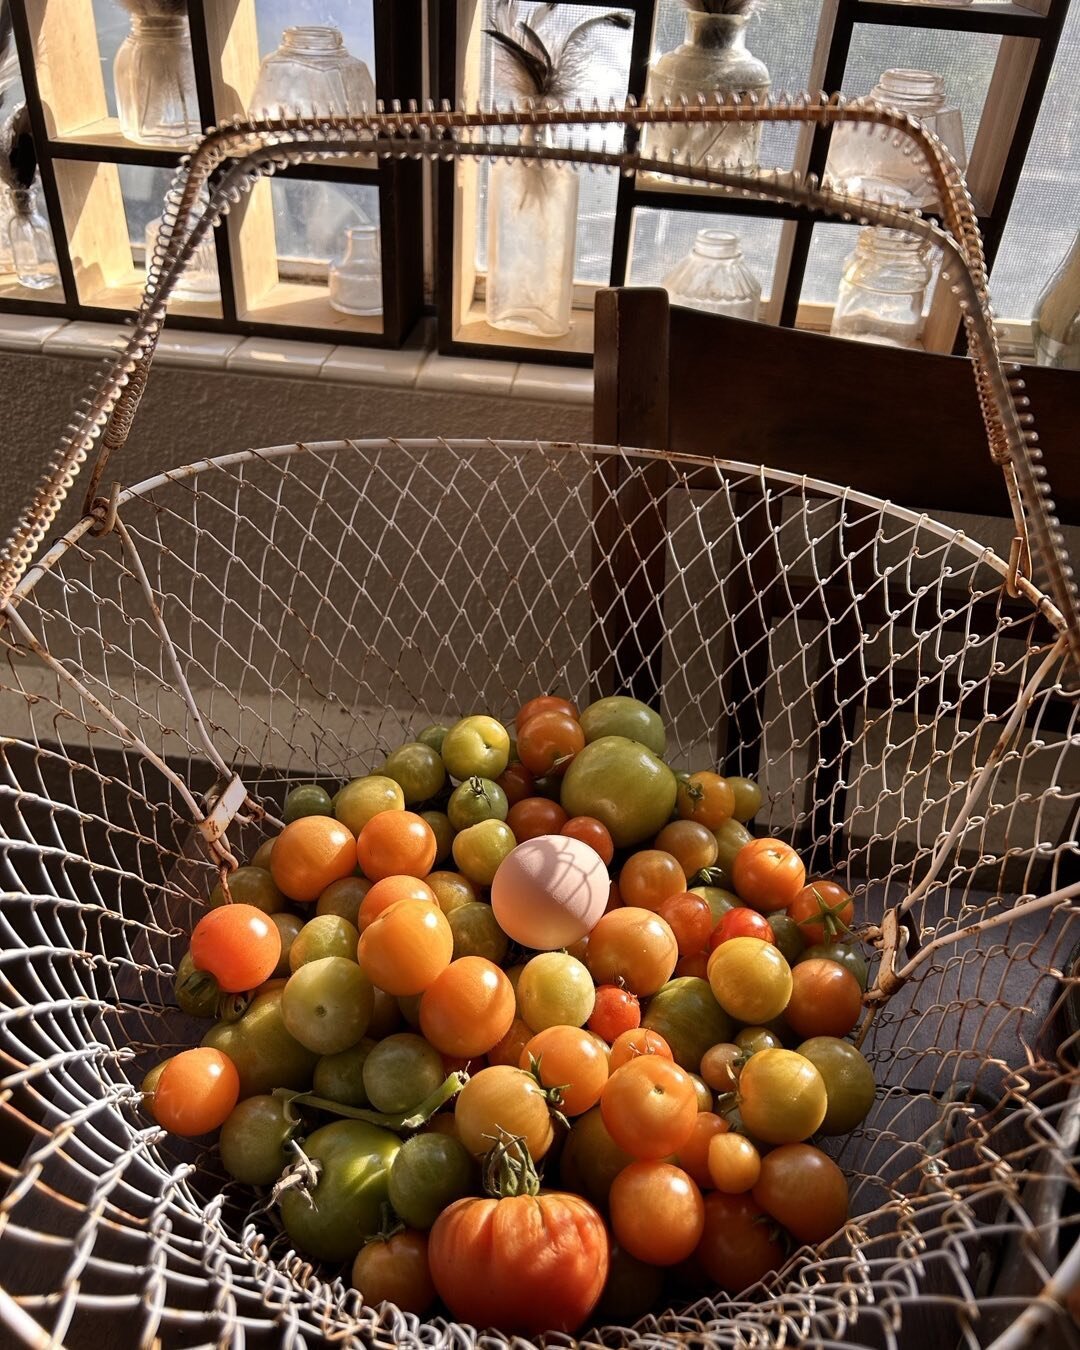 The last of the tenacious tomatoes from the greenhouse&hellip; and the first egg of the day from the hens. It will soon be time to replant for the year but the tomatoes wouldn&rsquo;t give up. With the cold temps and short daylight hours these would 